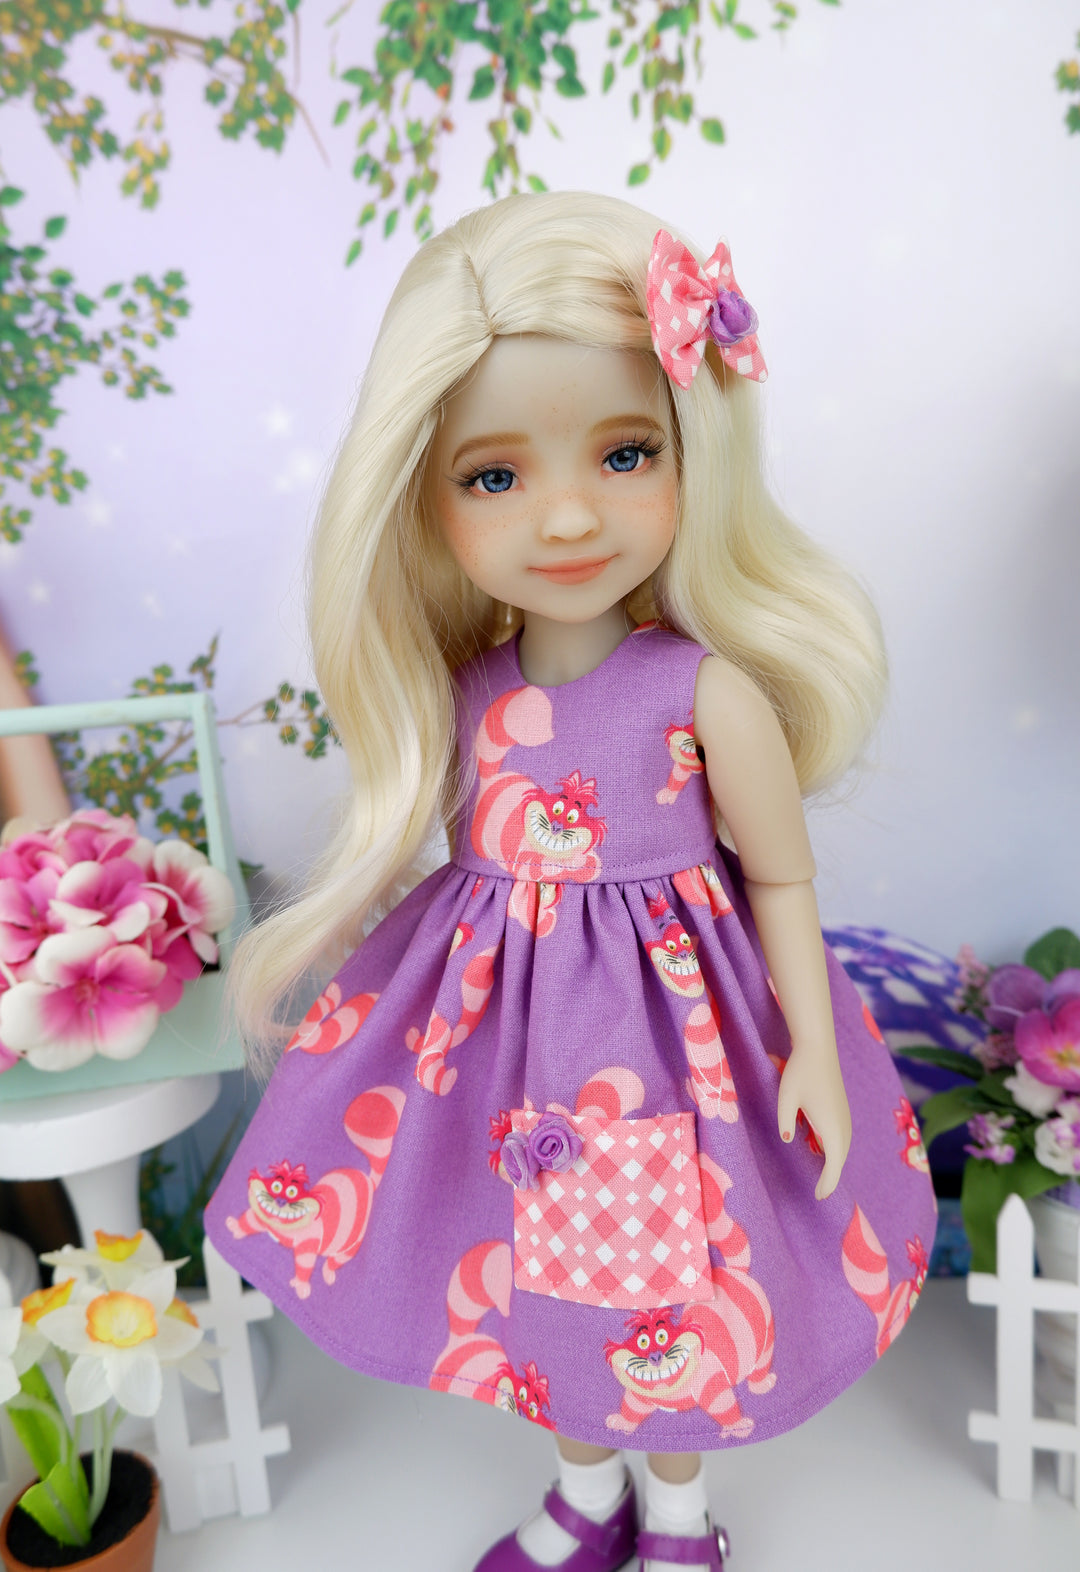 Cheshire Grin - dress with shoes for Ruby Red Fashion Friends doll